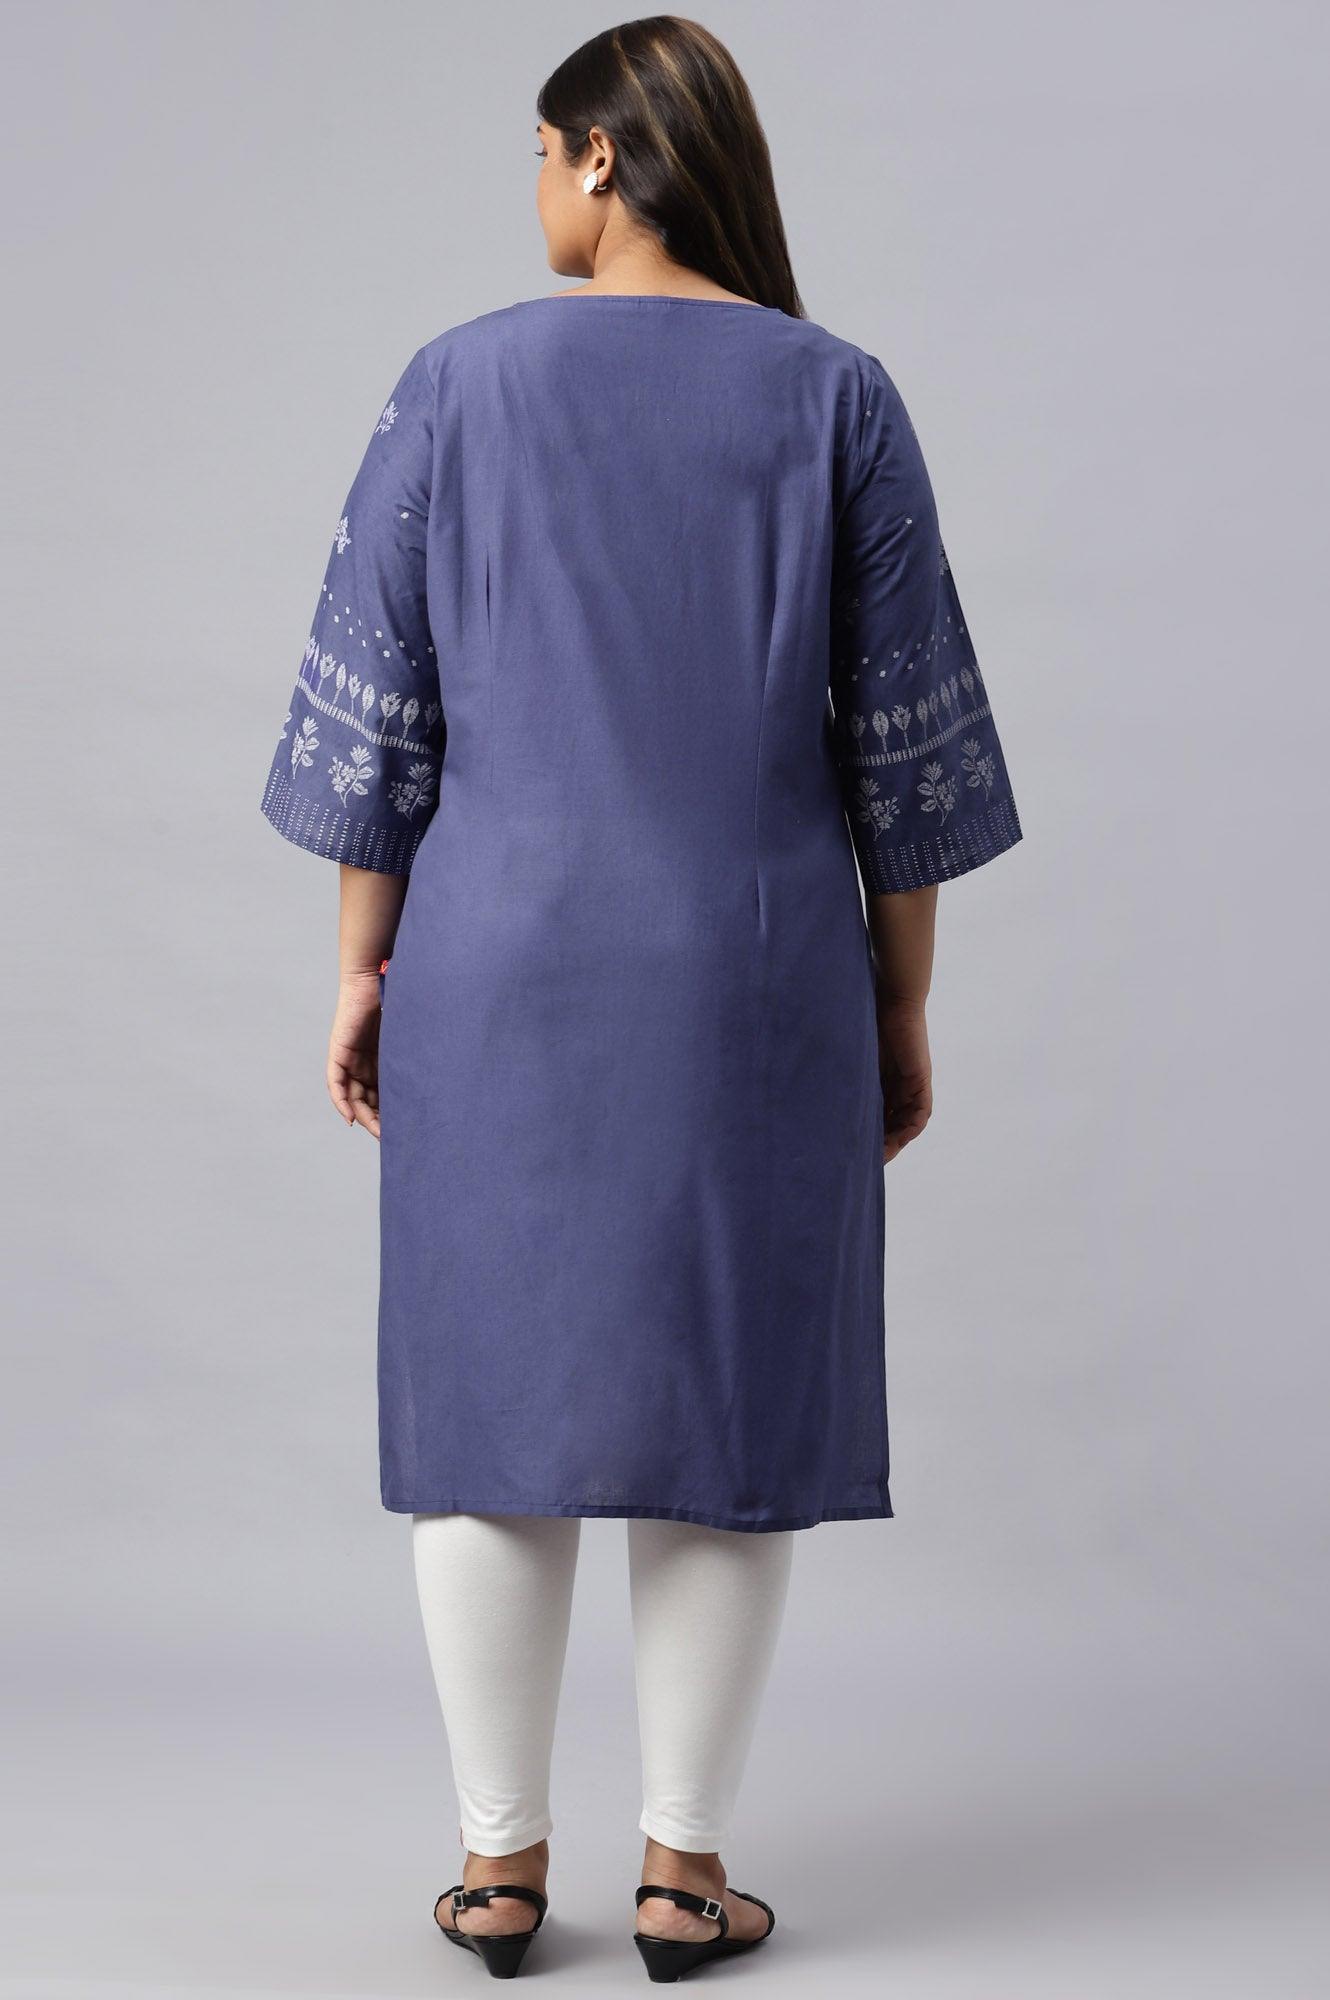 Plus Size Blue Floral Print kurta With Embroidered Neck - wforwoman